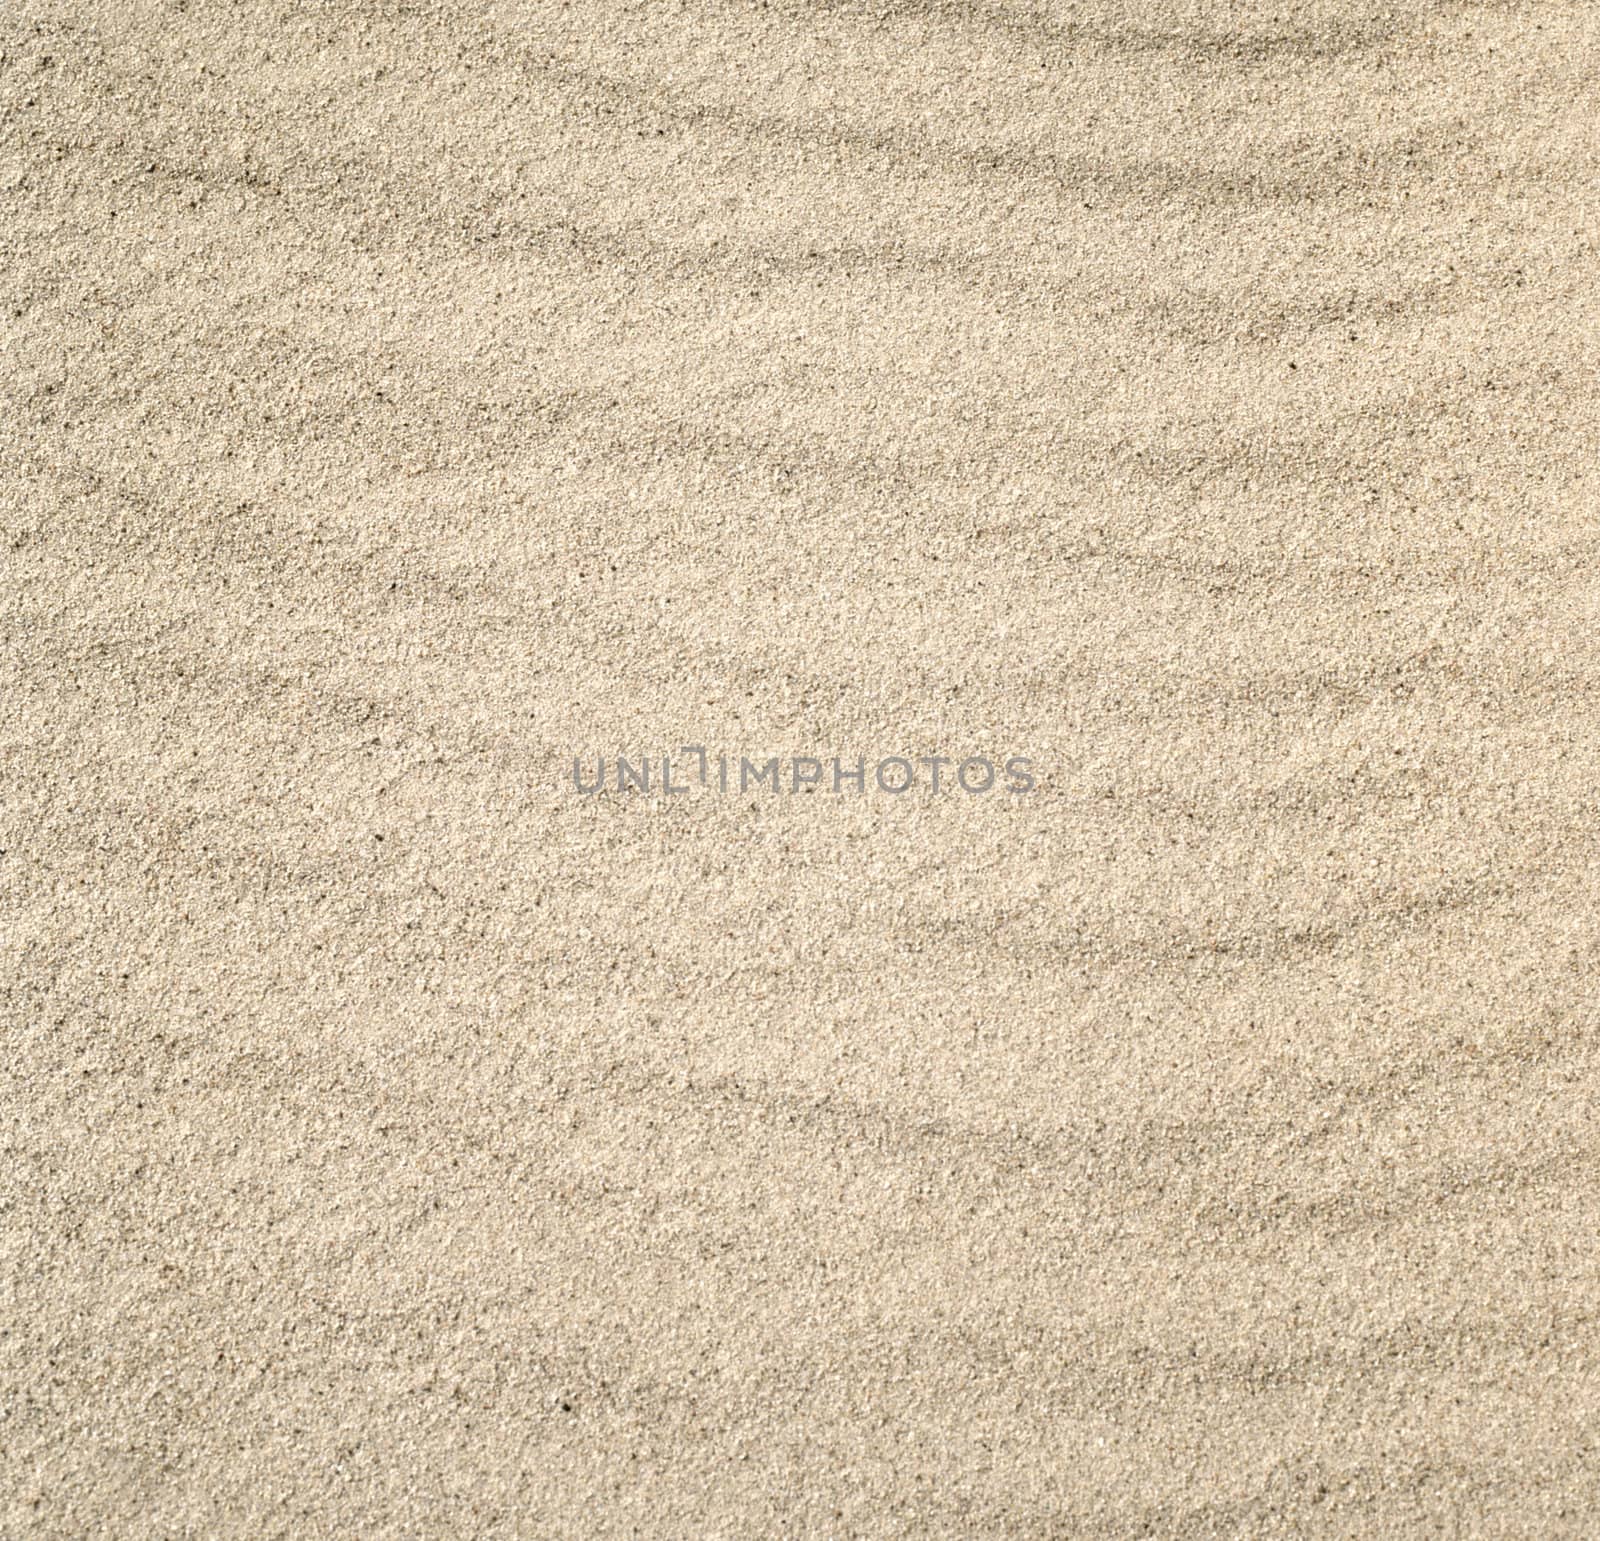 beautiful sand background abstract, arid, background, barren,